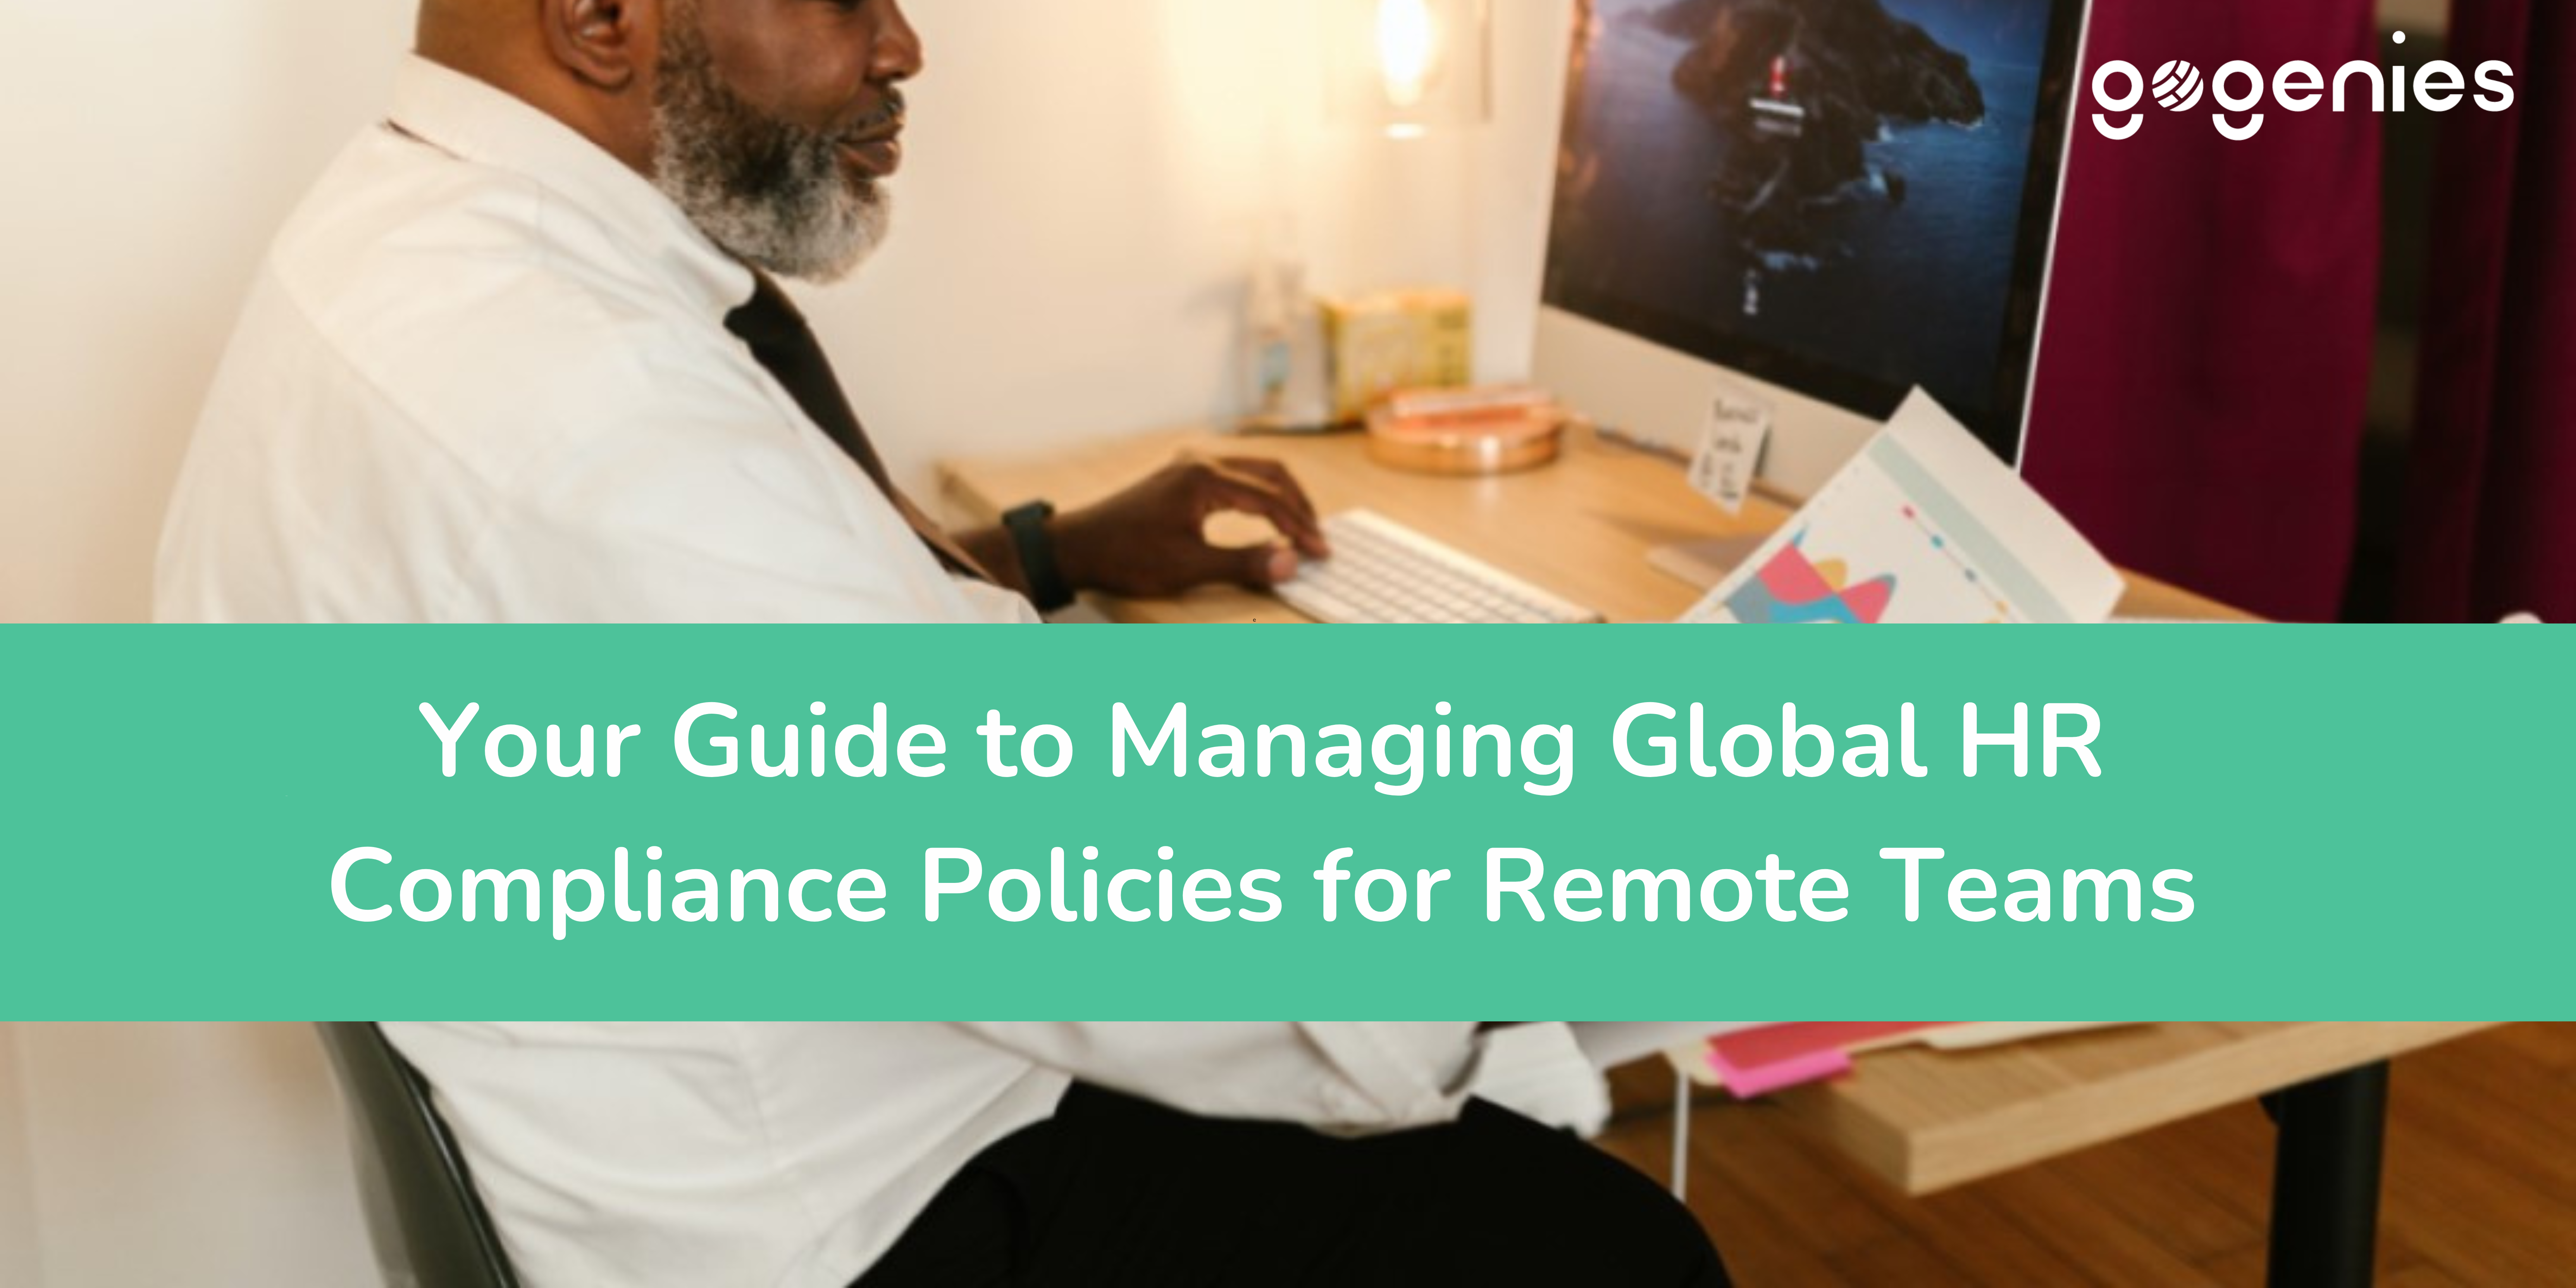 Your Guide to Managing Global HR Compliance Policies for Remote Teams